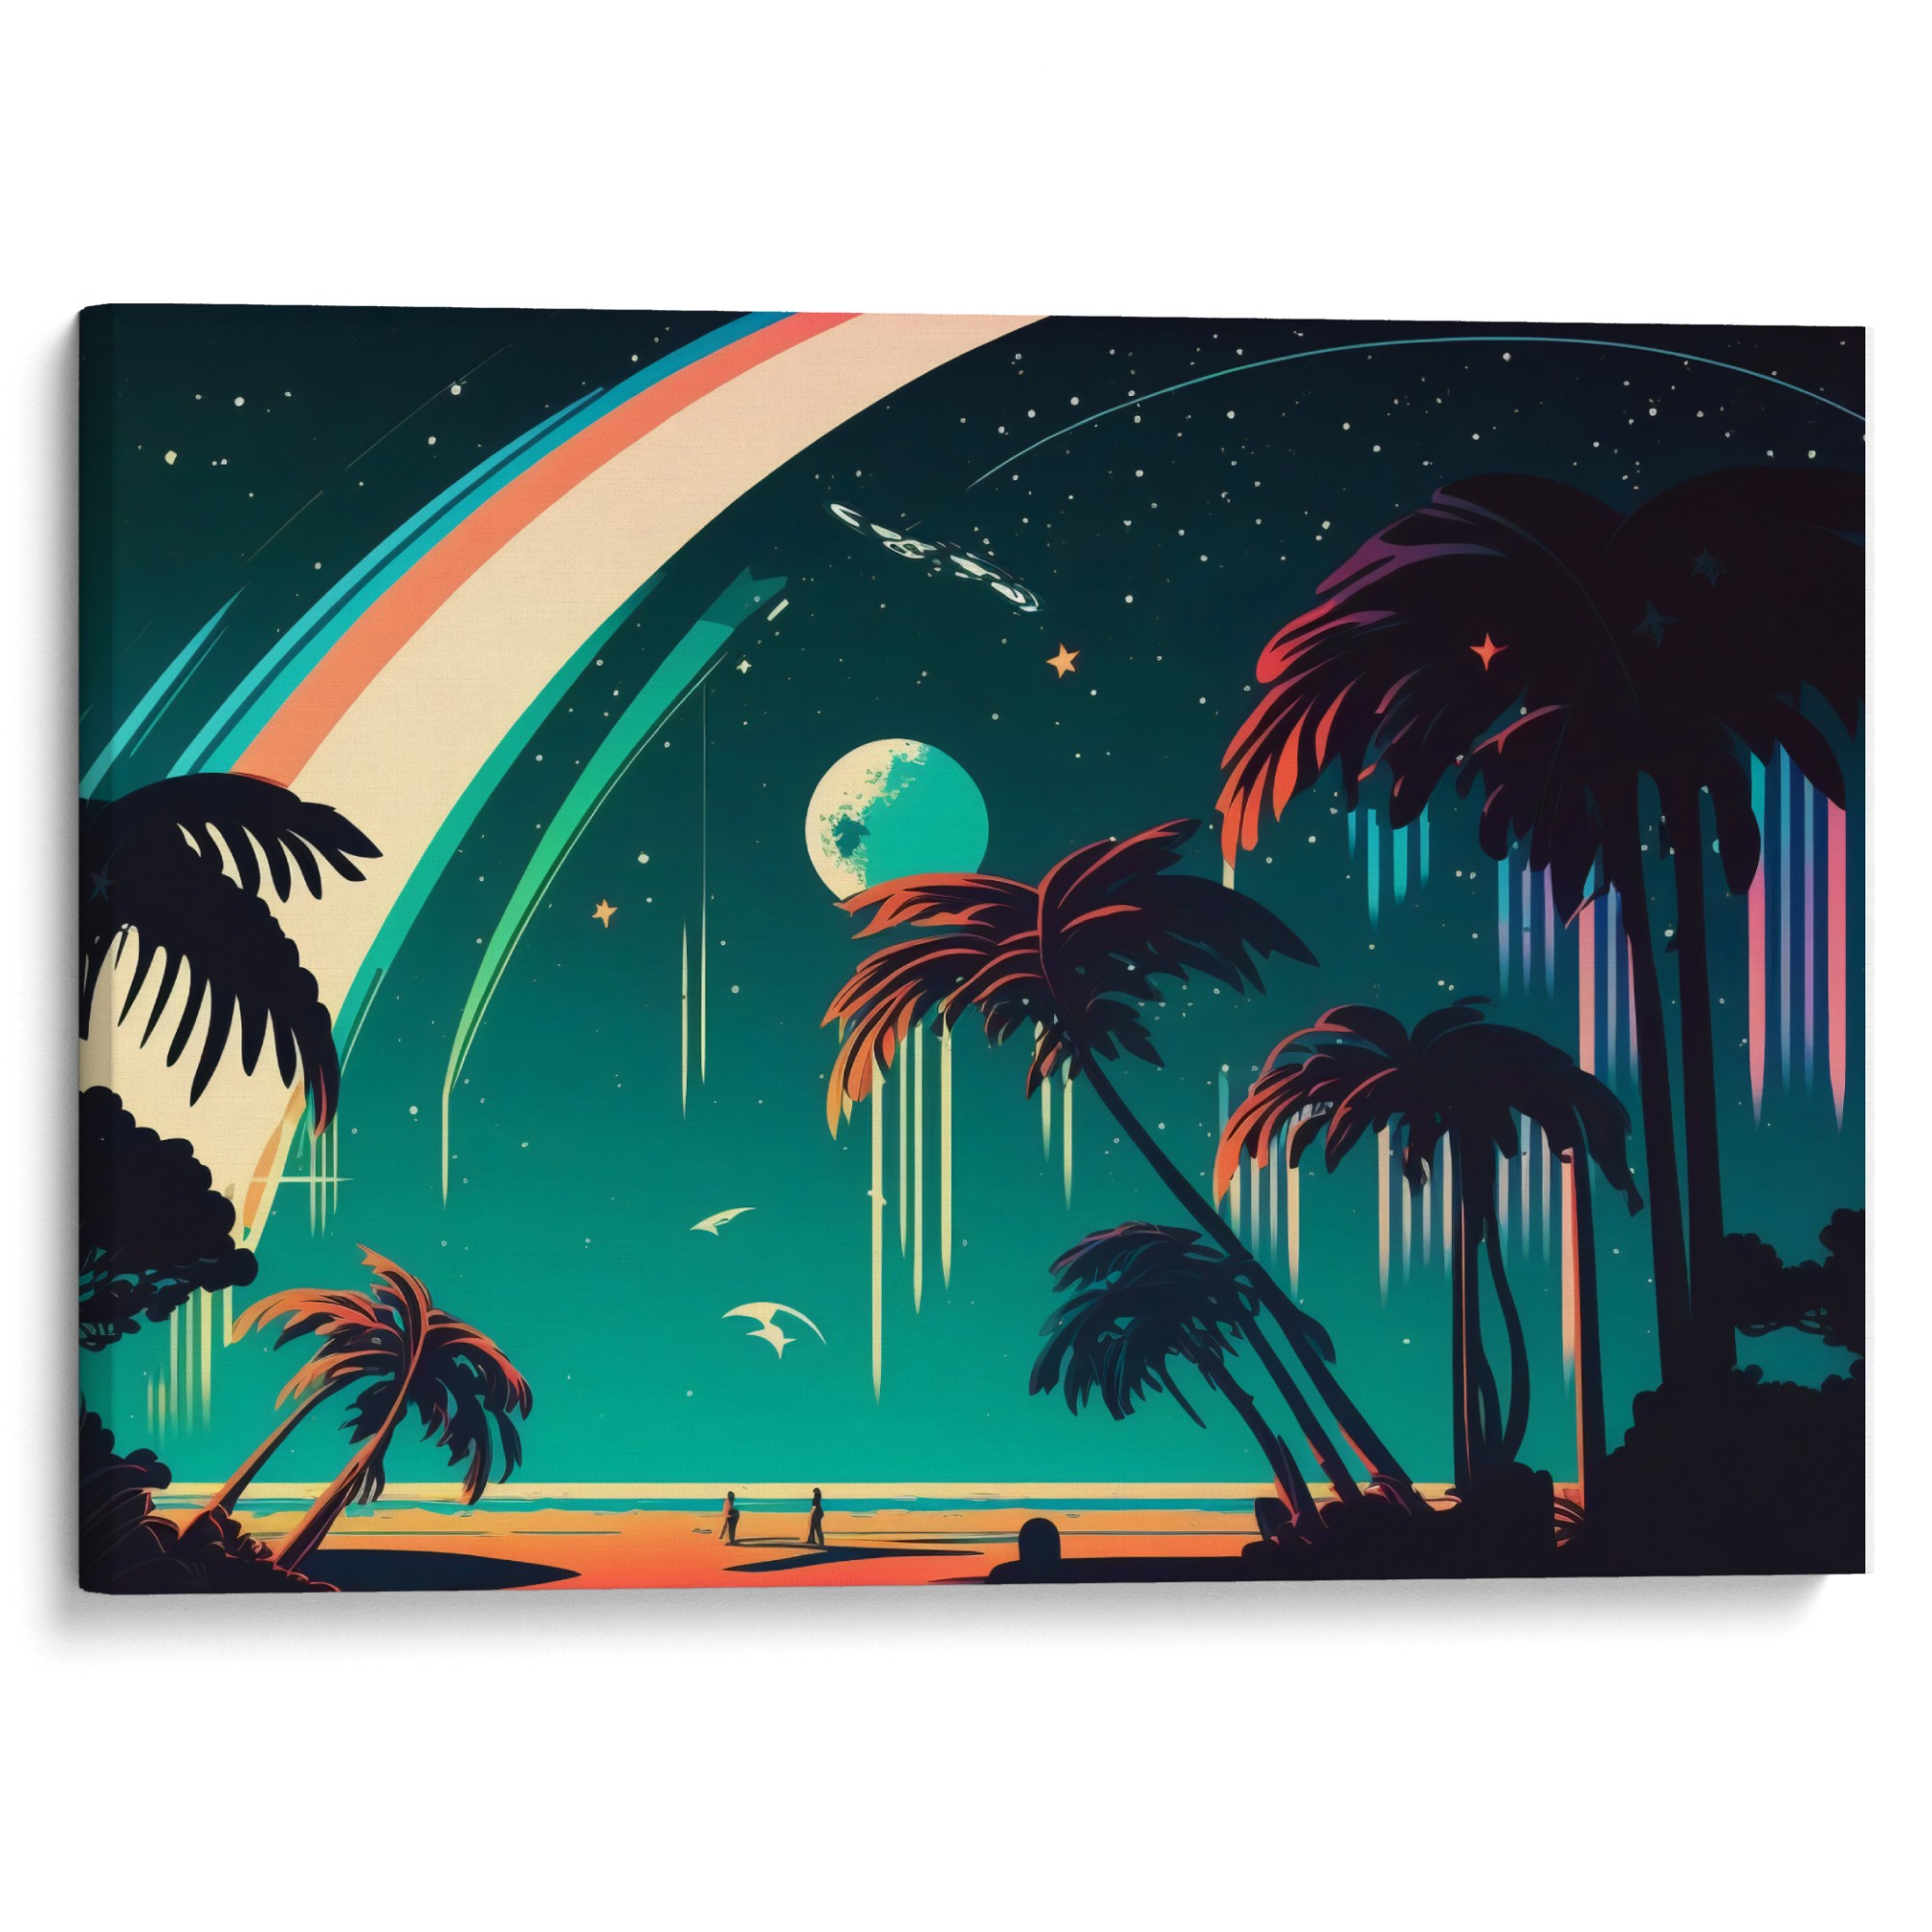 GALAXY GARDEN Exclusive Canvas - Starlit beach with glowing palms, a centerpiece for art enthusiasts.